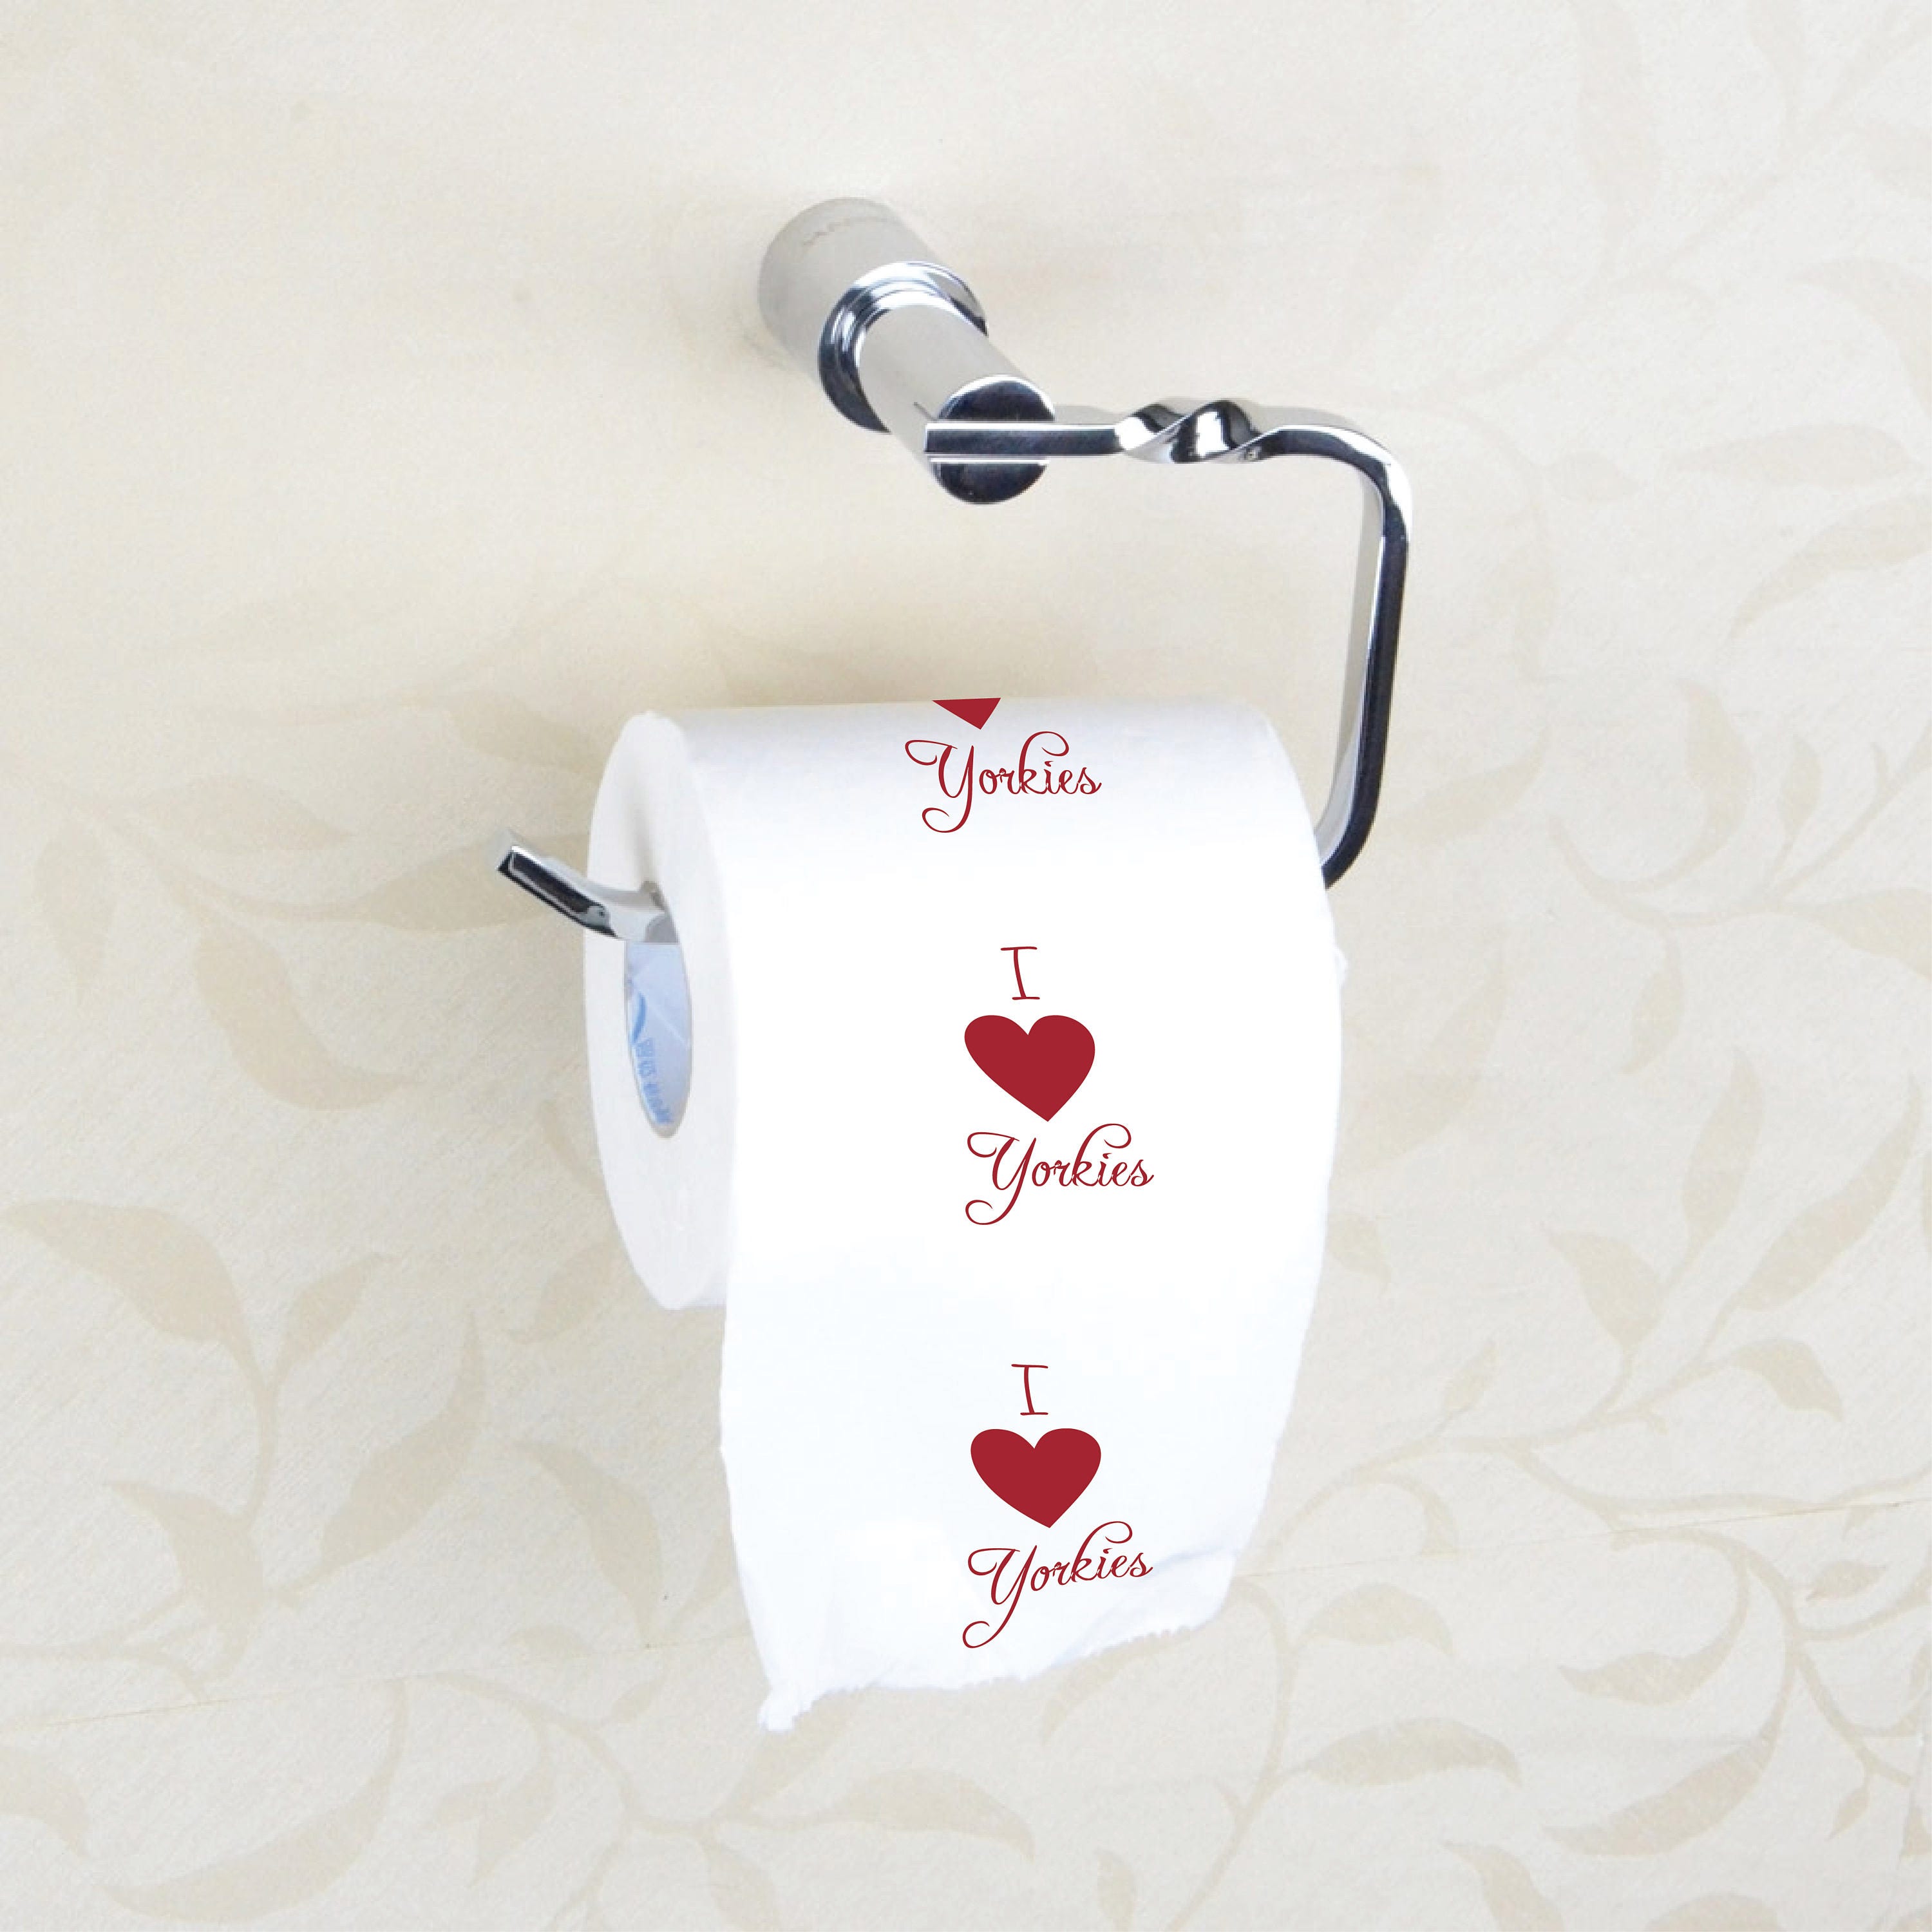 Yellow toilet roll holder. official online shop.